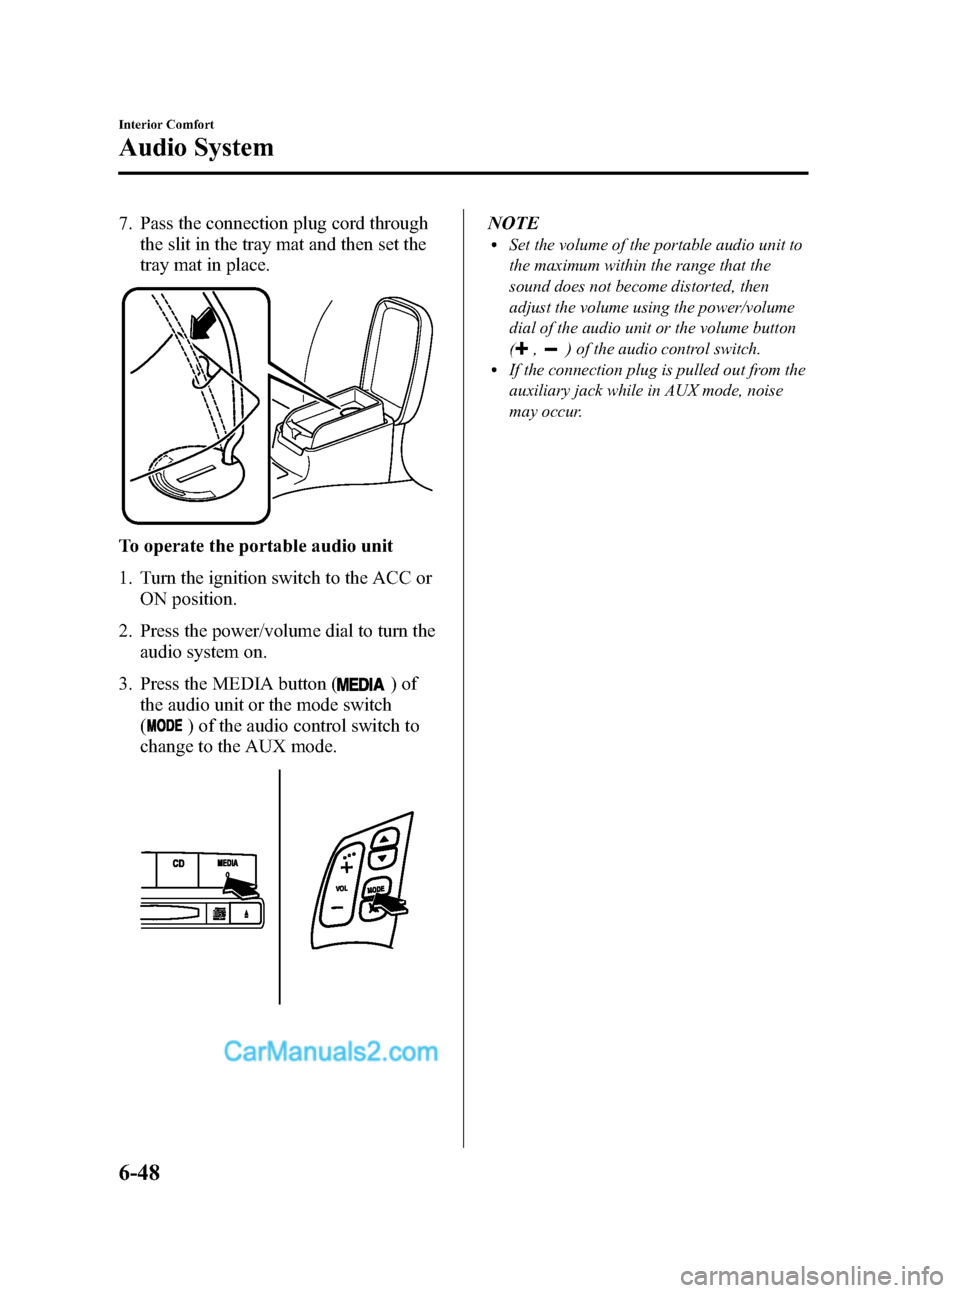 MAZDA MODEL MAZDASPEED 3 2008   (in English) Owners Guide Black plate (226,1)
7. Pass the connection plug cord through
the slit in the tray mat and then set the
tray mat in place.
To operate the portable audio unit
1. Turn the ignition switch to the ACC or
O